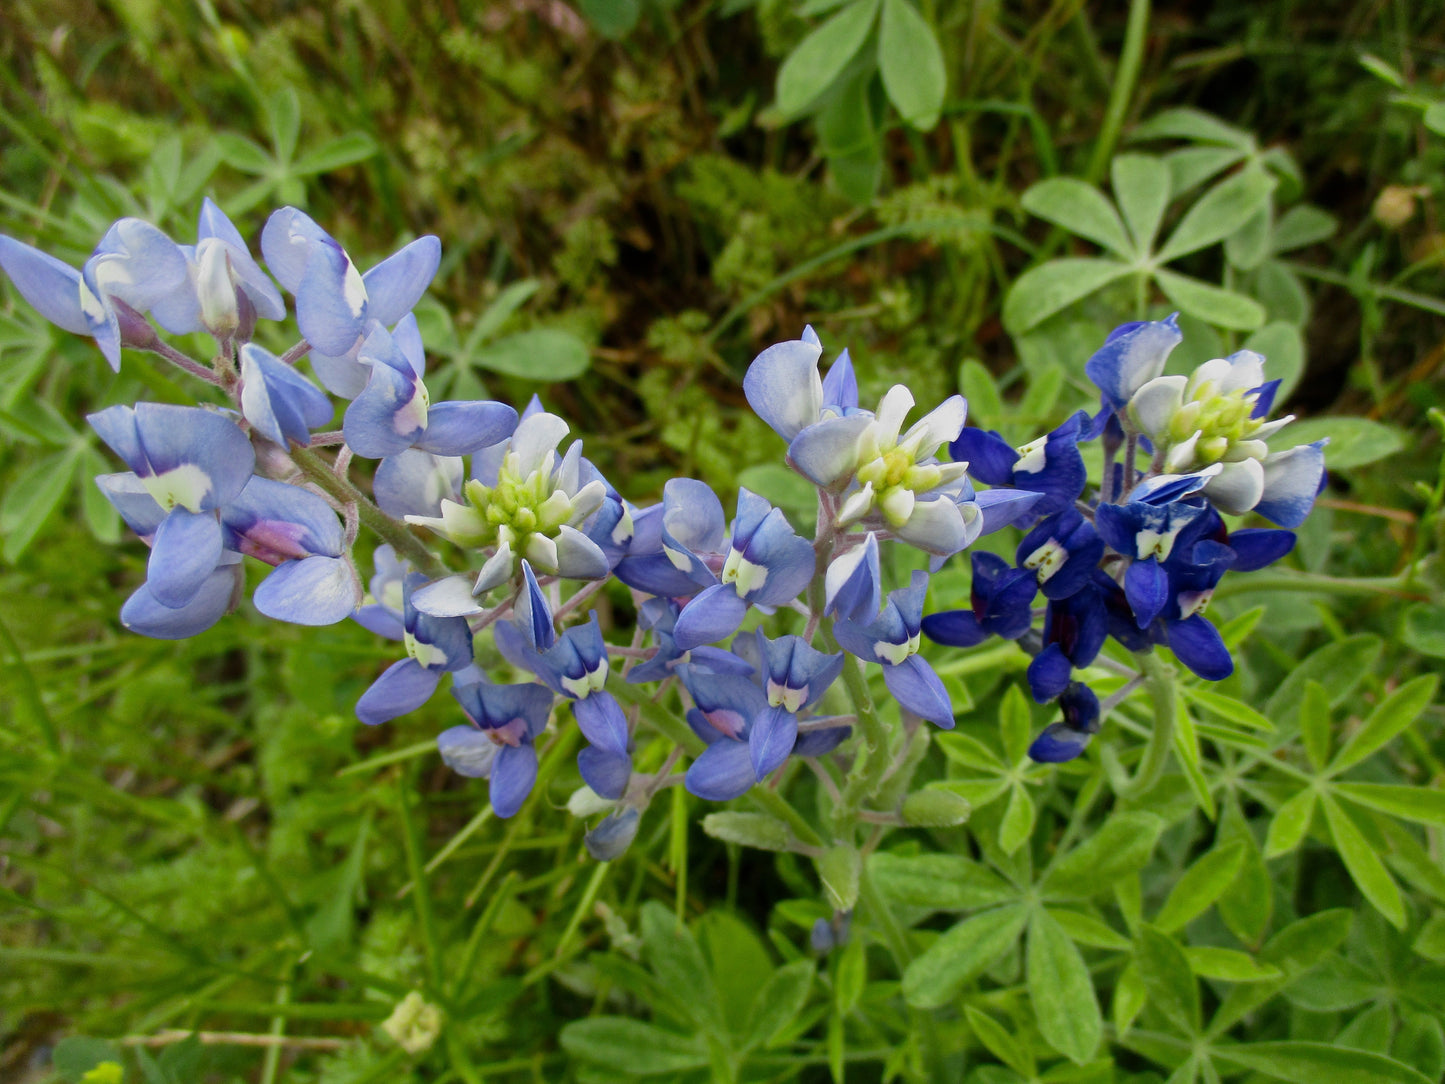 ORIGINAL PHOTO taken by Evan L.:   Out of green leaves arise flowers with almost triangular petals. The flowers on the left are periwinkle blue tipped with white; the rightmost is a very deep blue tipped with white.